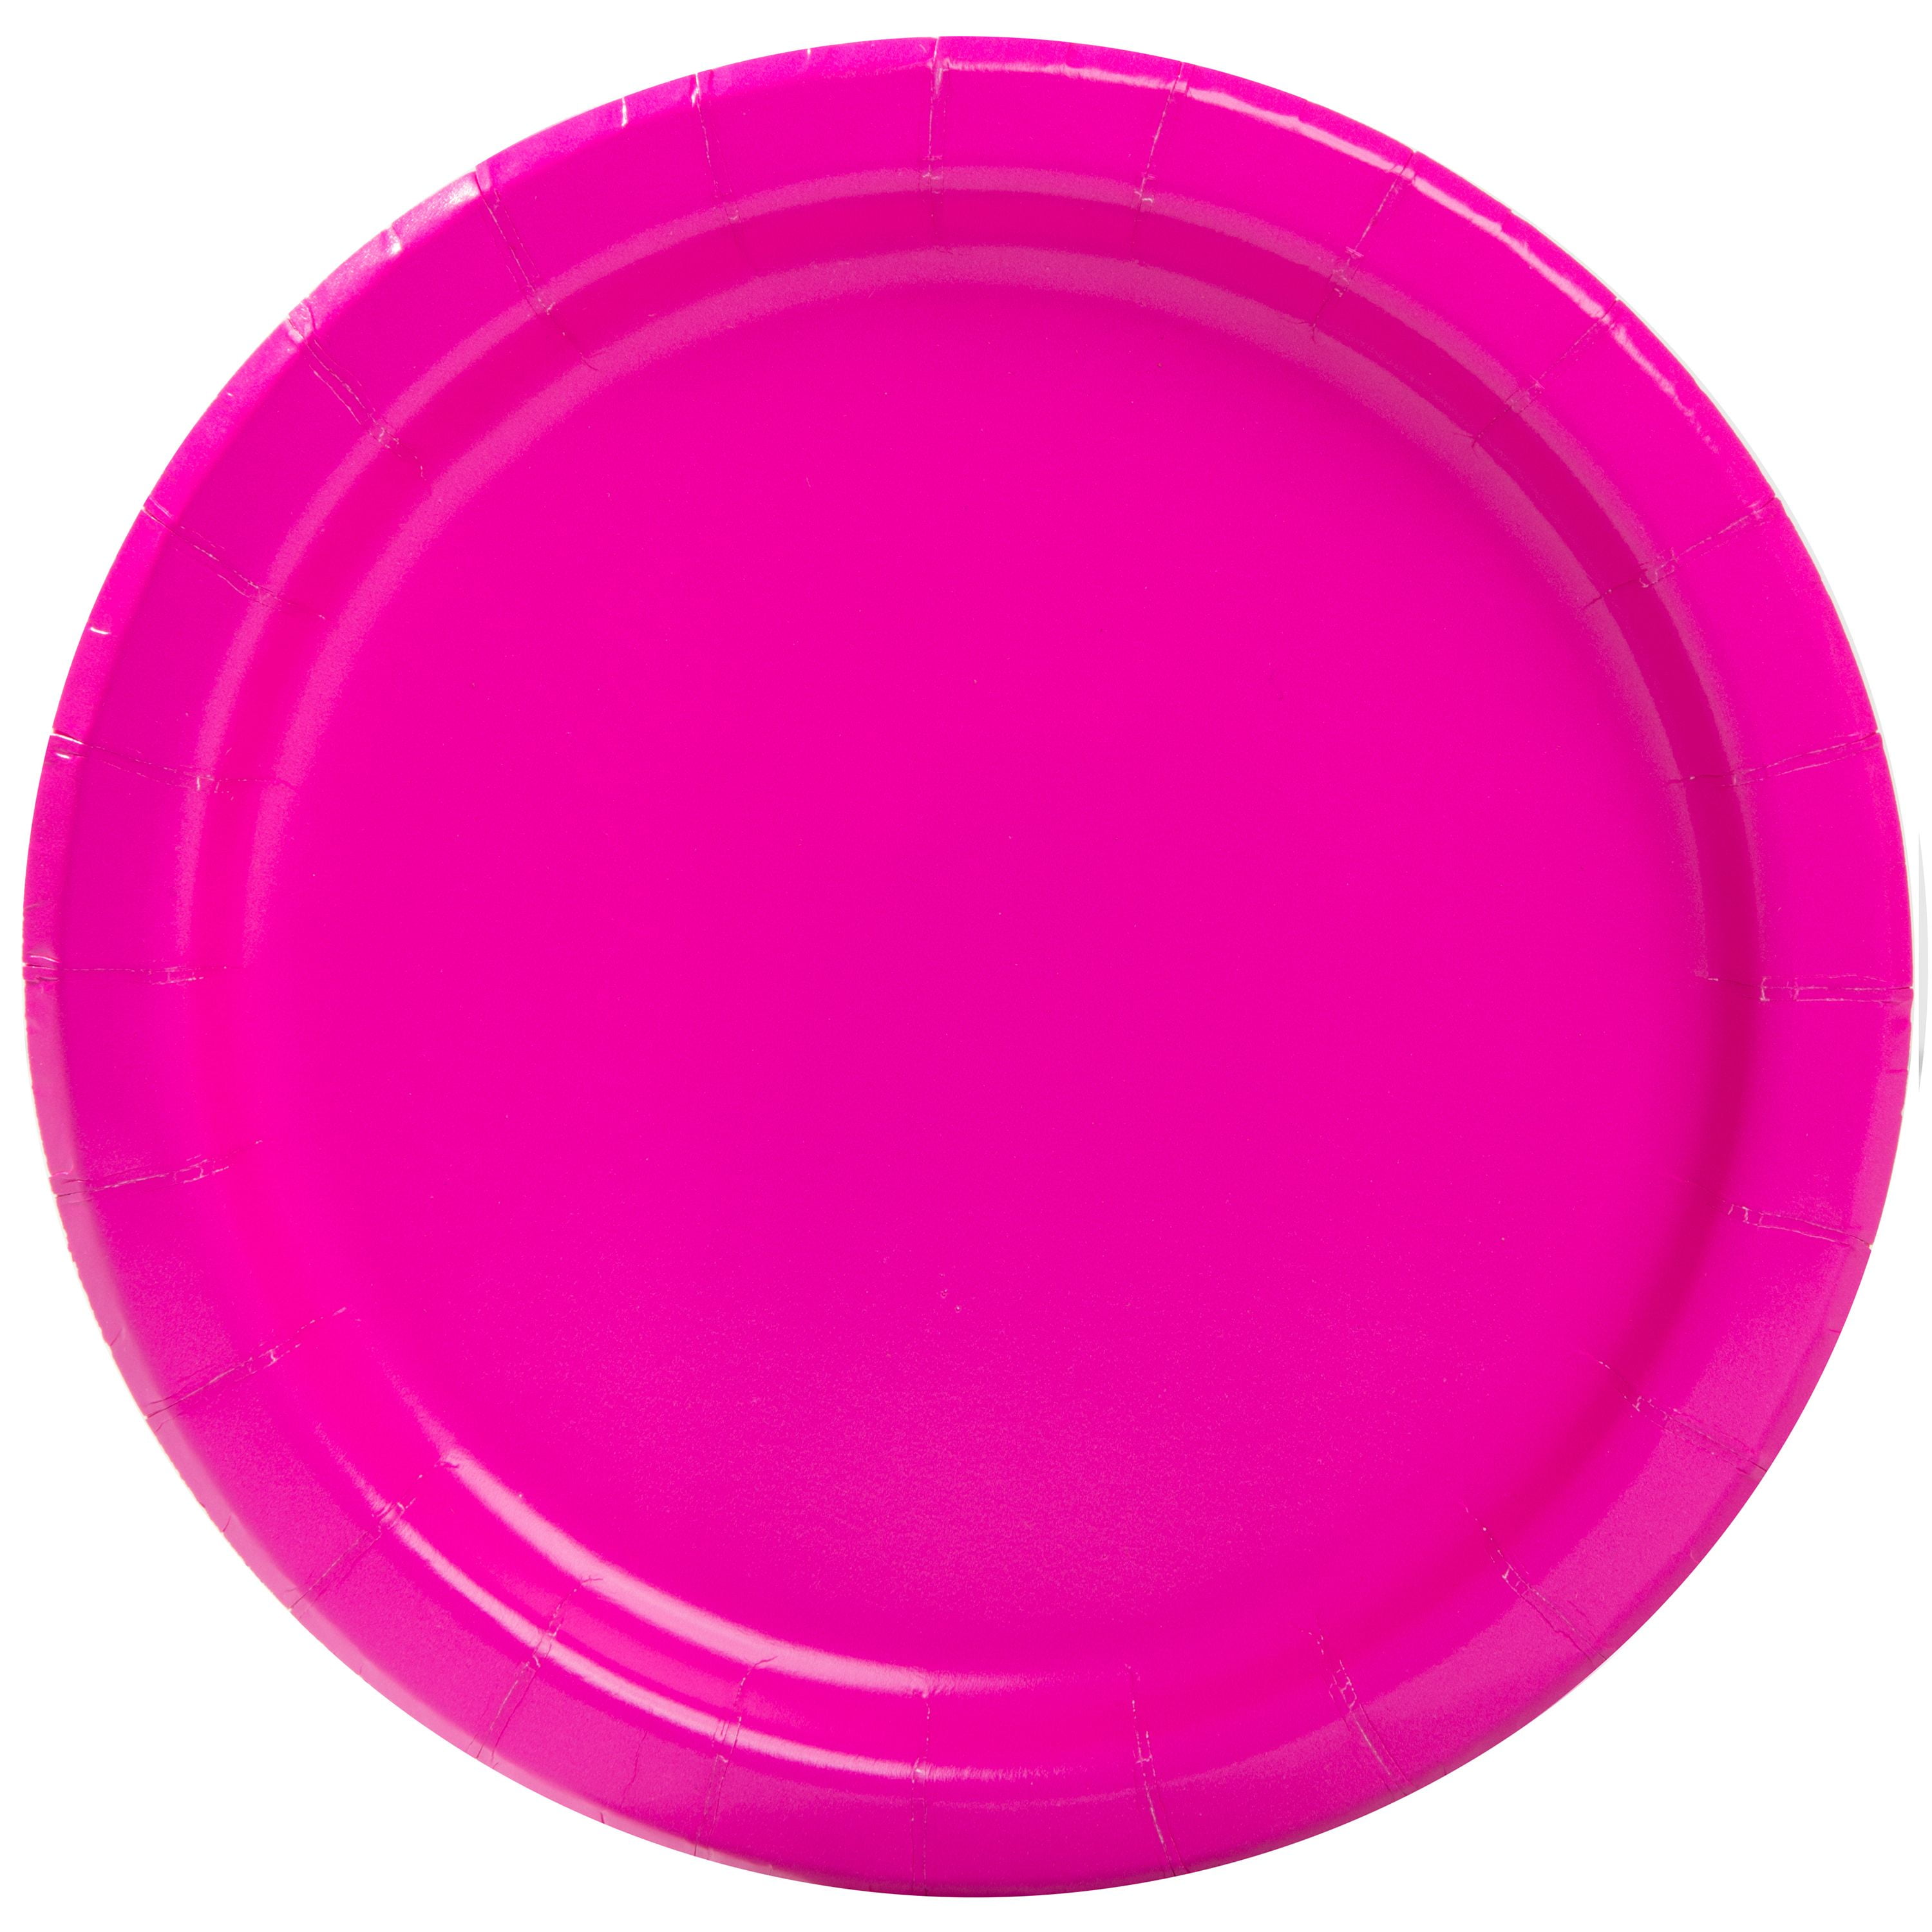 Sparksettings Pink Disposable Paper Dessert Plates 6 3/4 Inches